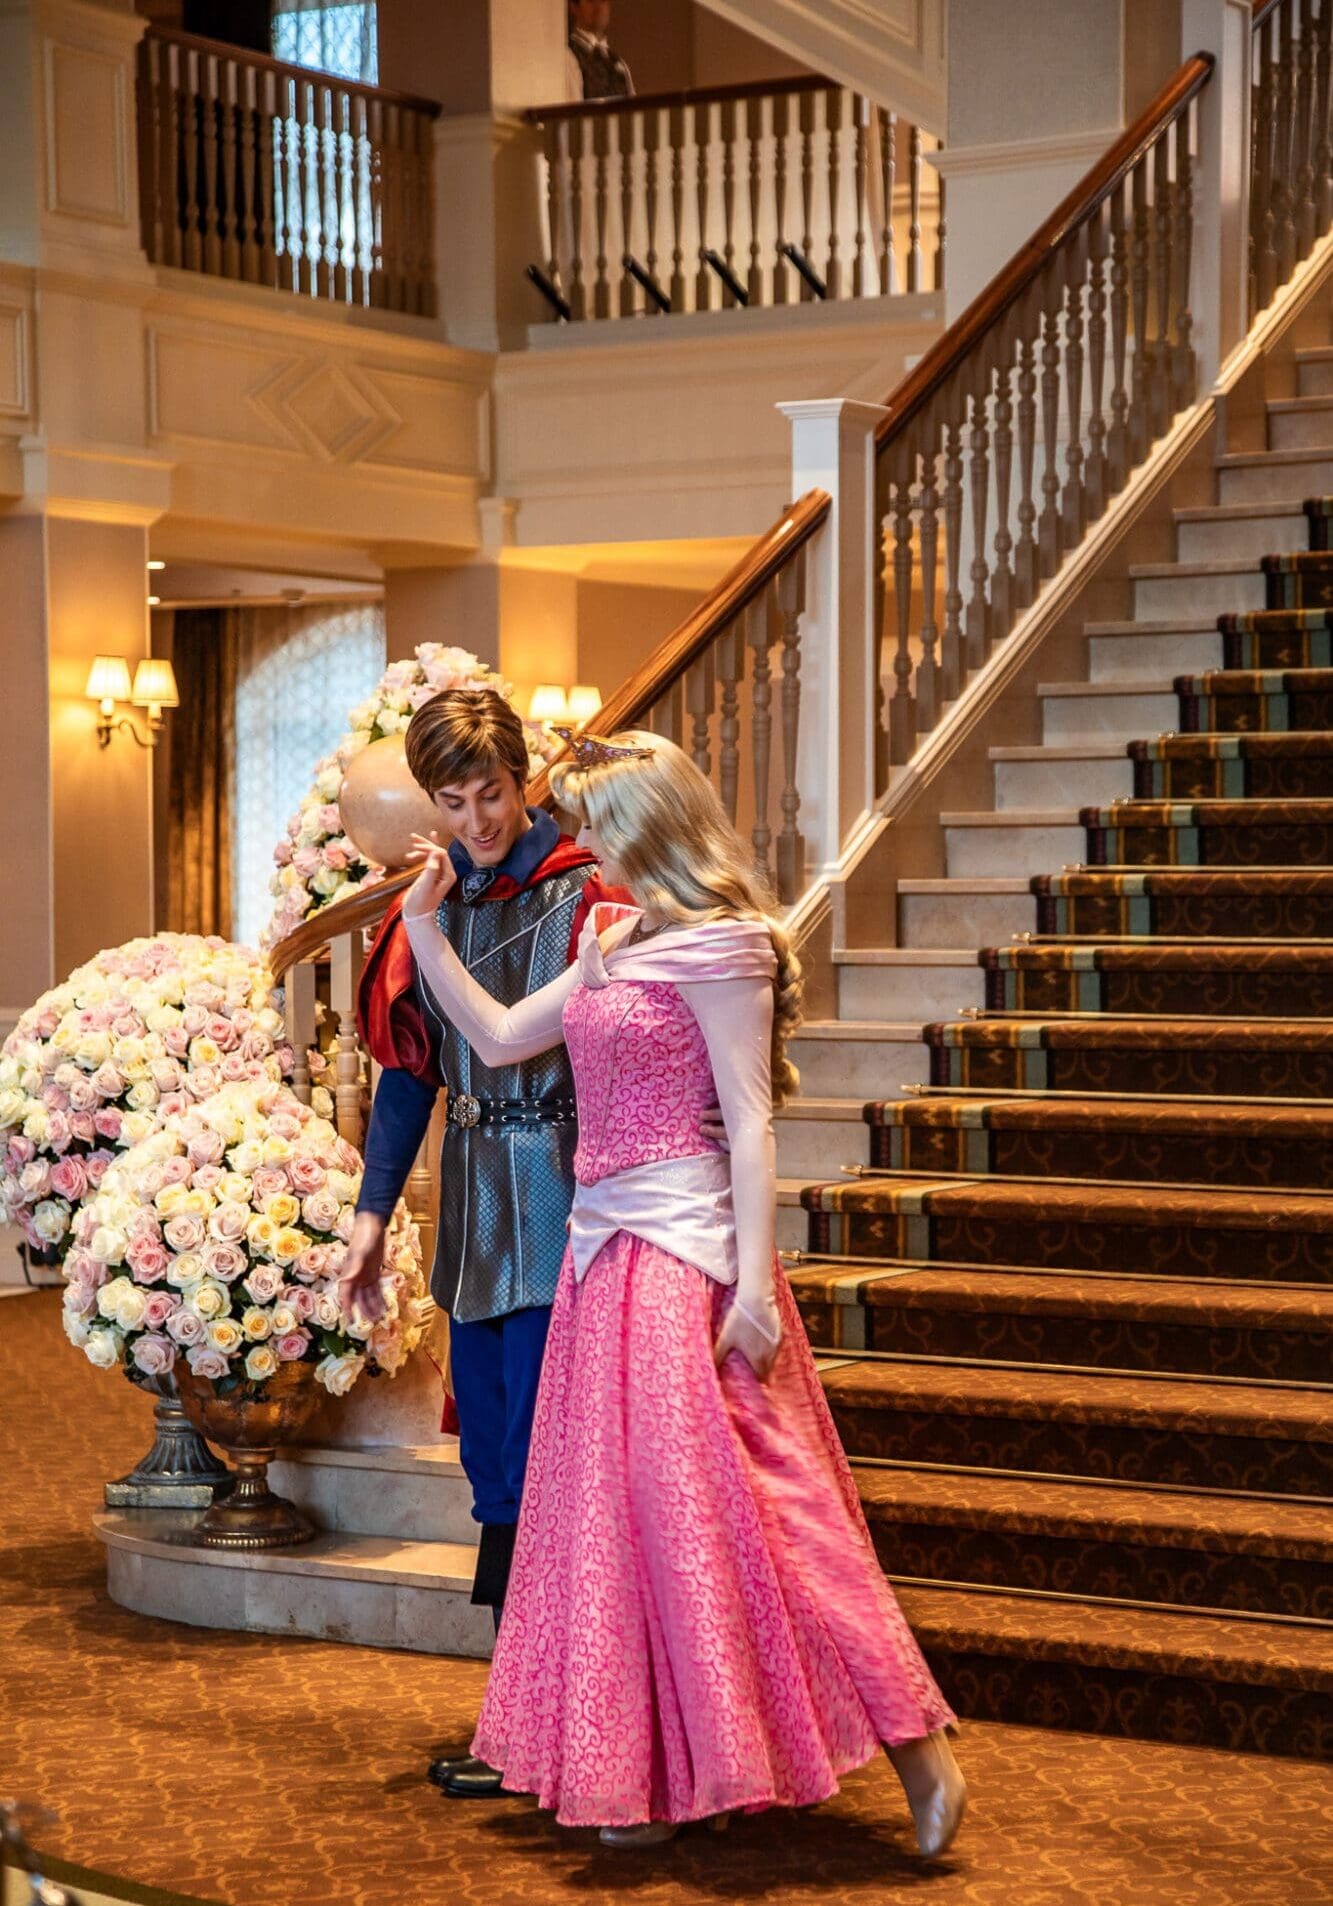 Sleeping Beauty and Prince Charming standing together at the bottom of the stairs at Disneyland Hotel Paris